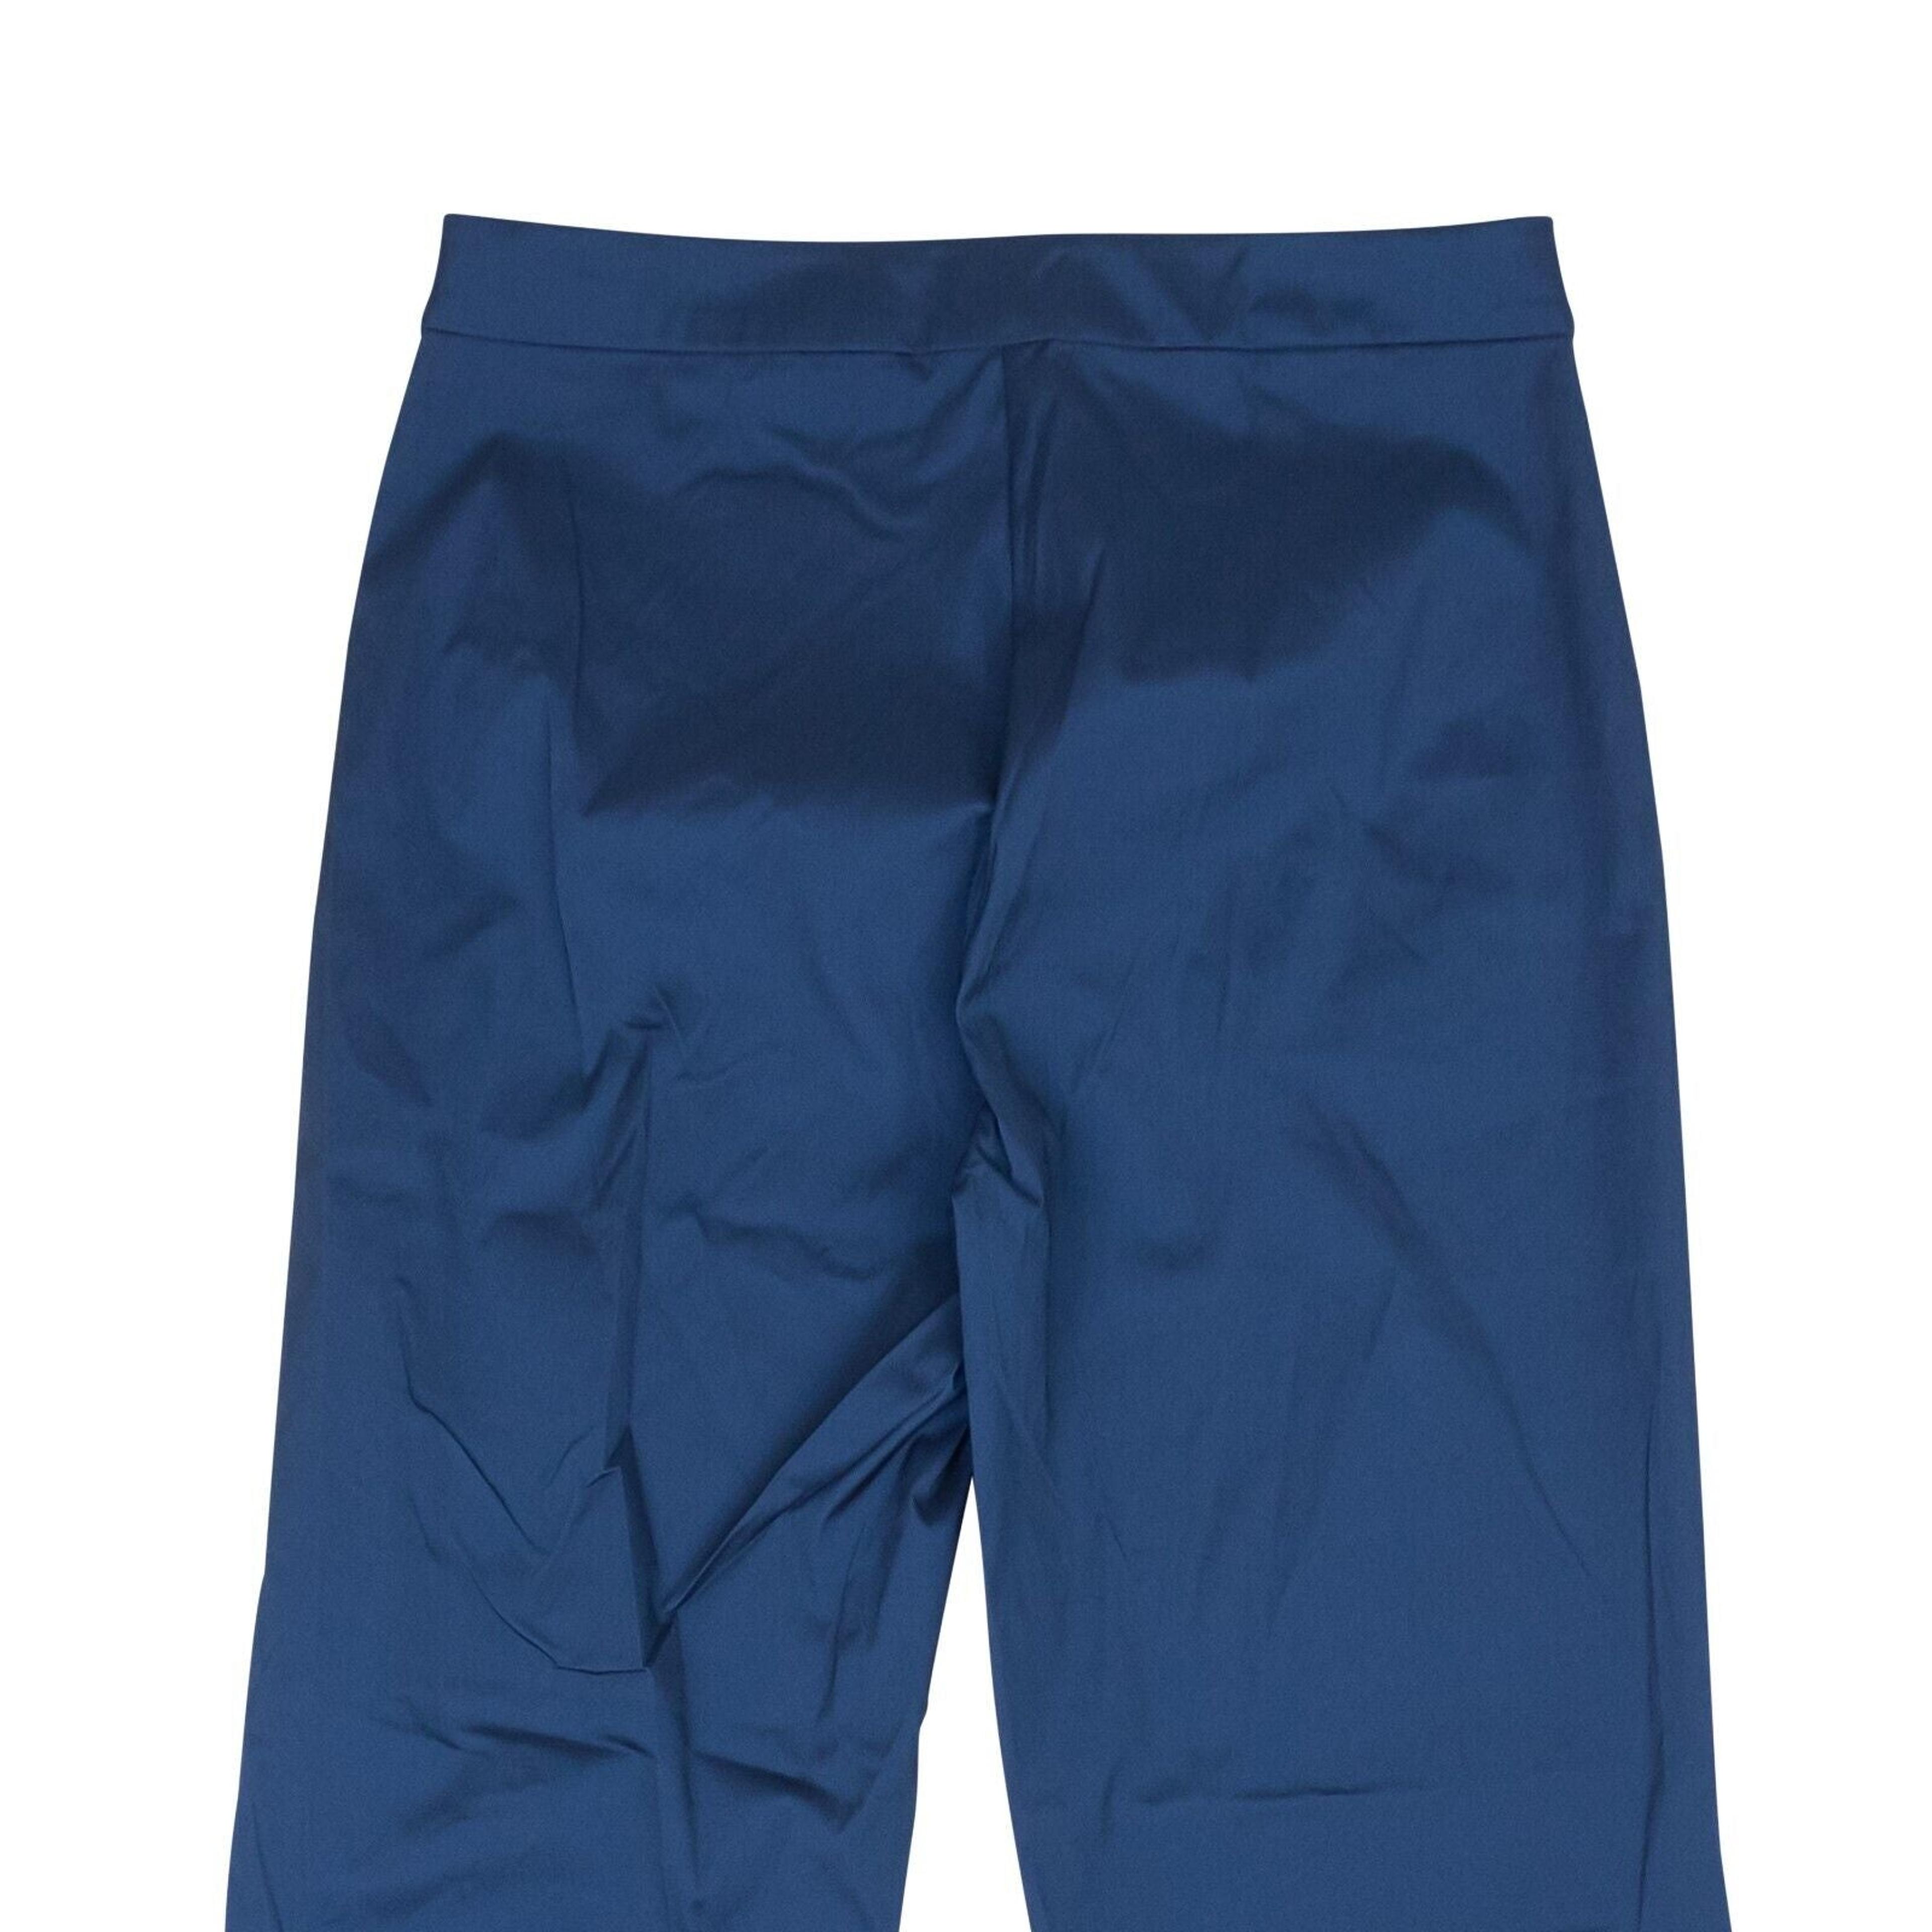 Alternate View 3 of Navy Blue Stretchy Baby Cigarette Pants